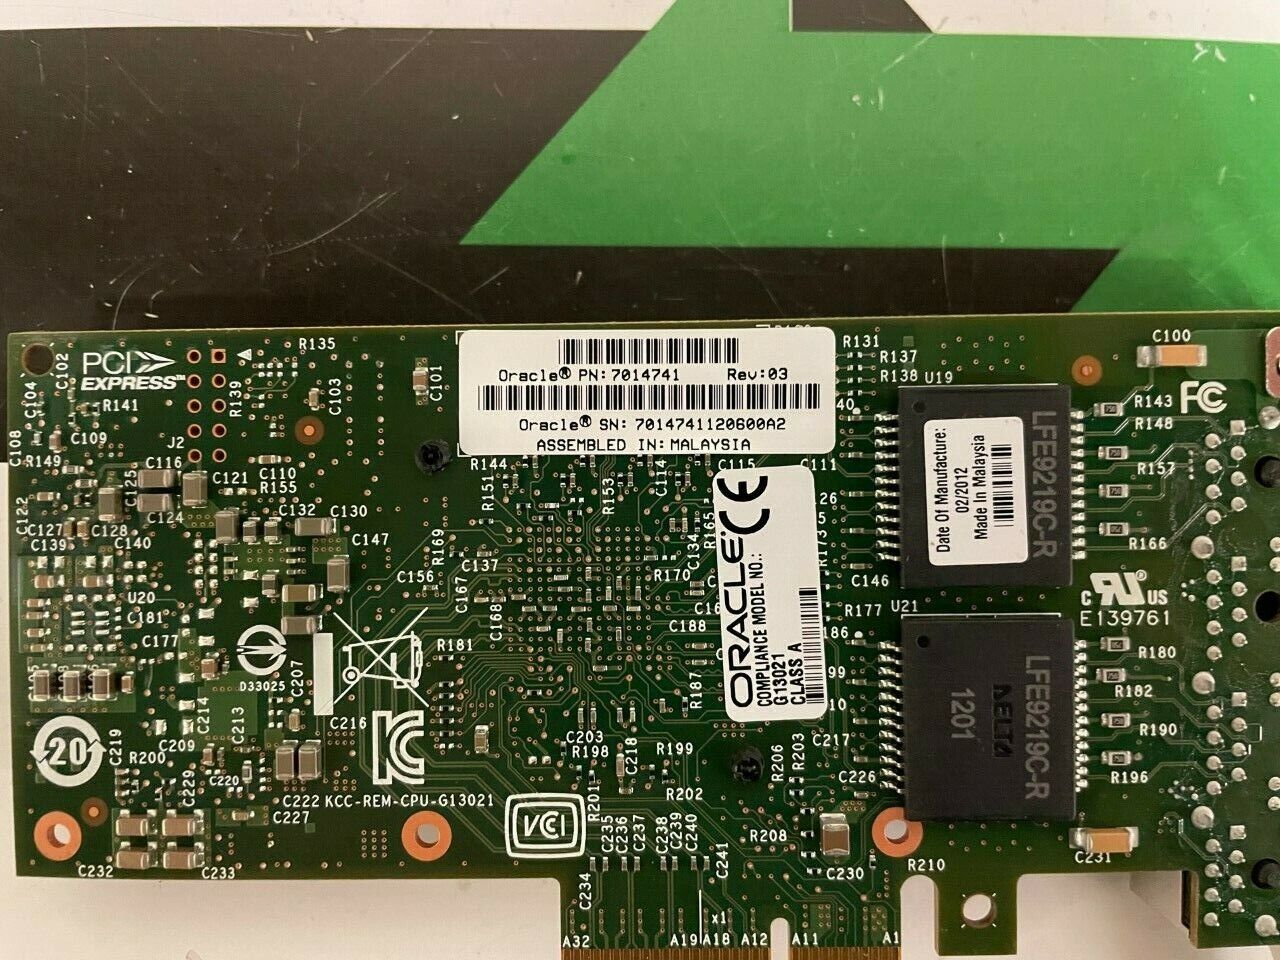 7014741 Sun Quad Port Ethernet Gigabit Network Adapter. pulled from T5-4